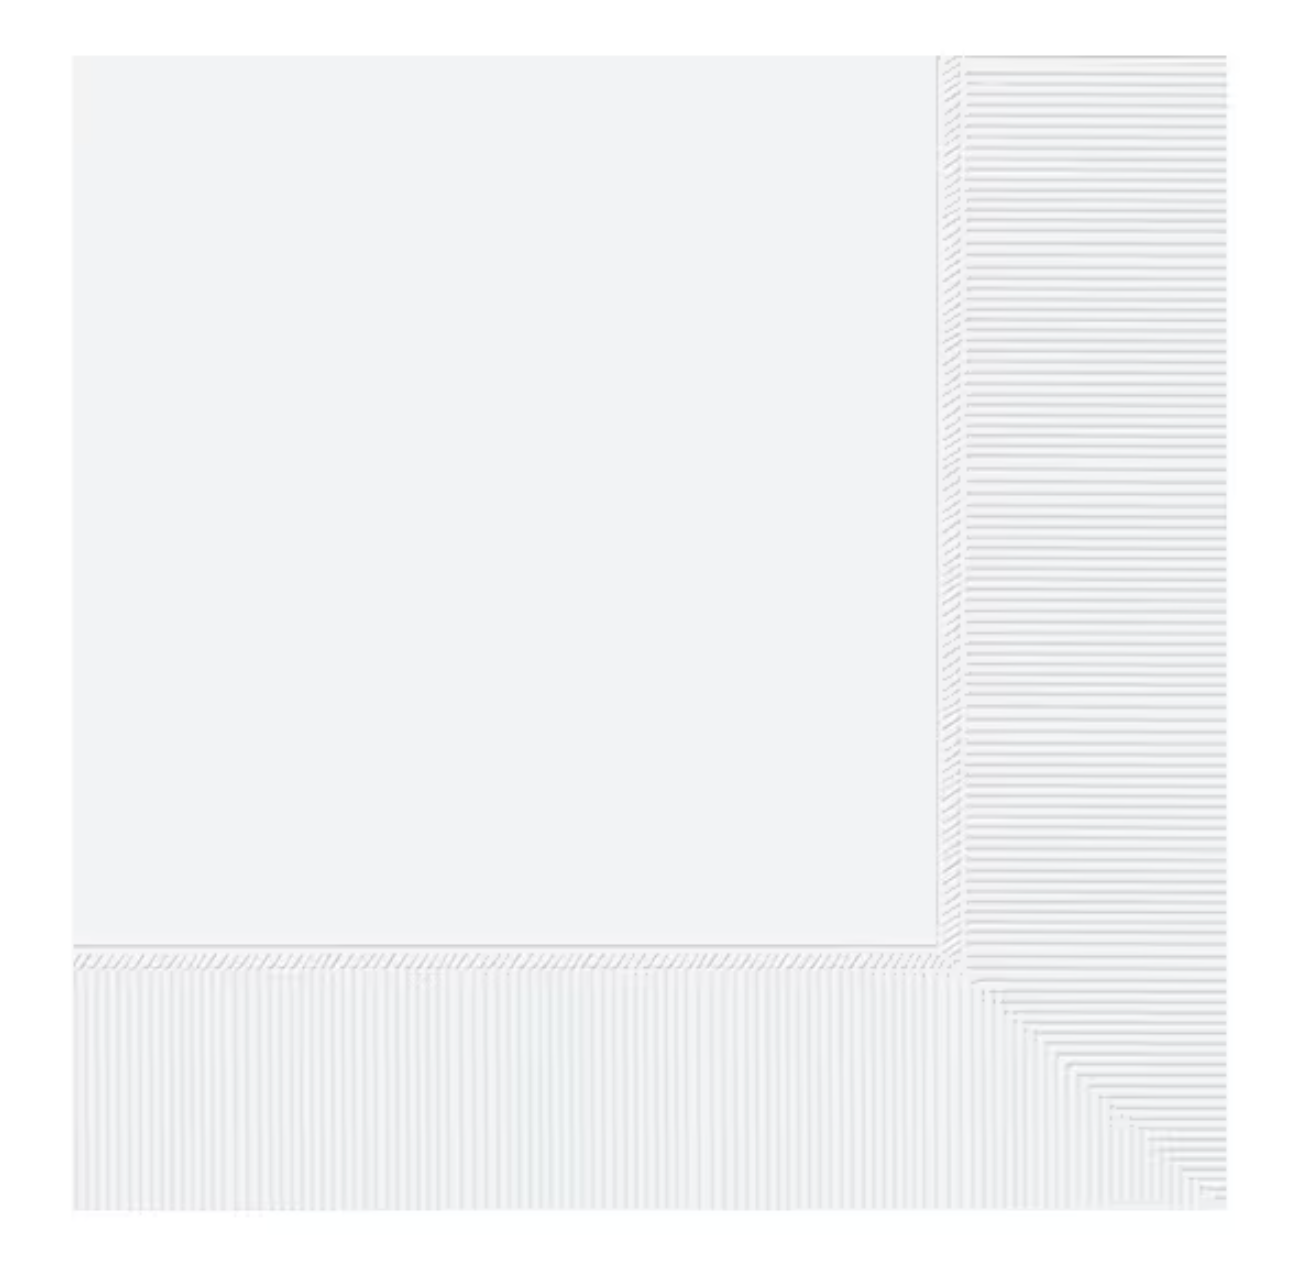 Lunch Napkin 3-Ply – White  - 20 per Pack